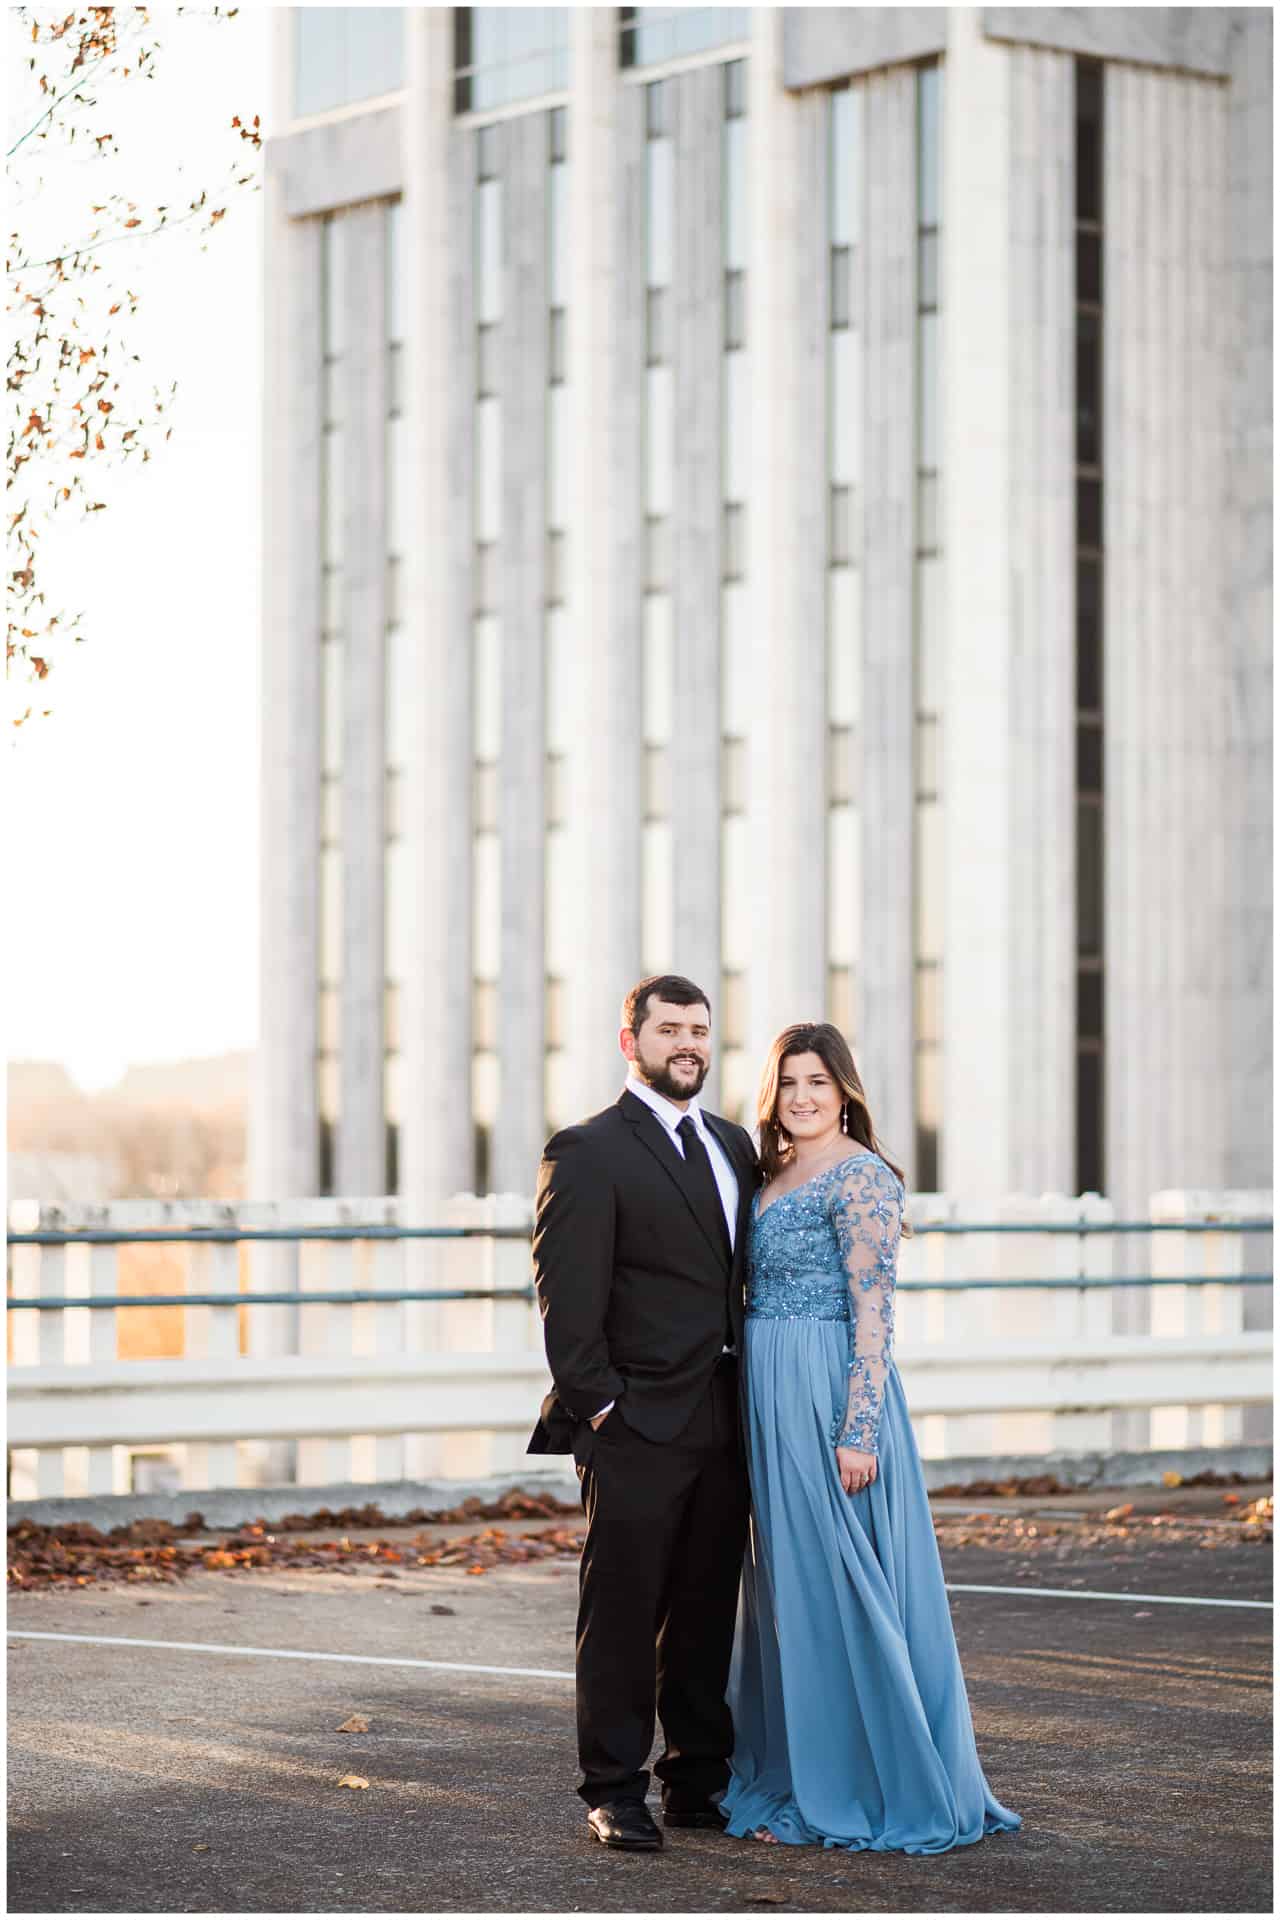 Formal Fall engagement session - downtown Huntsville